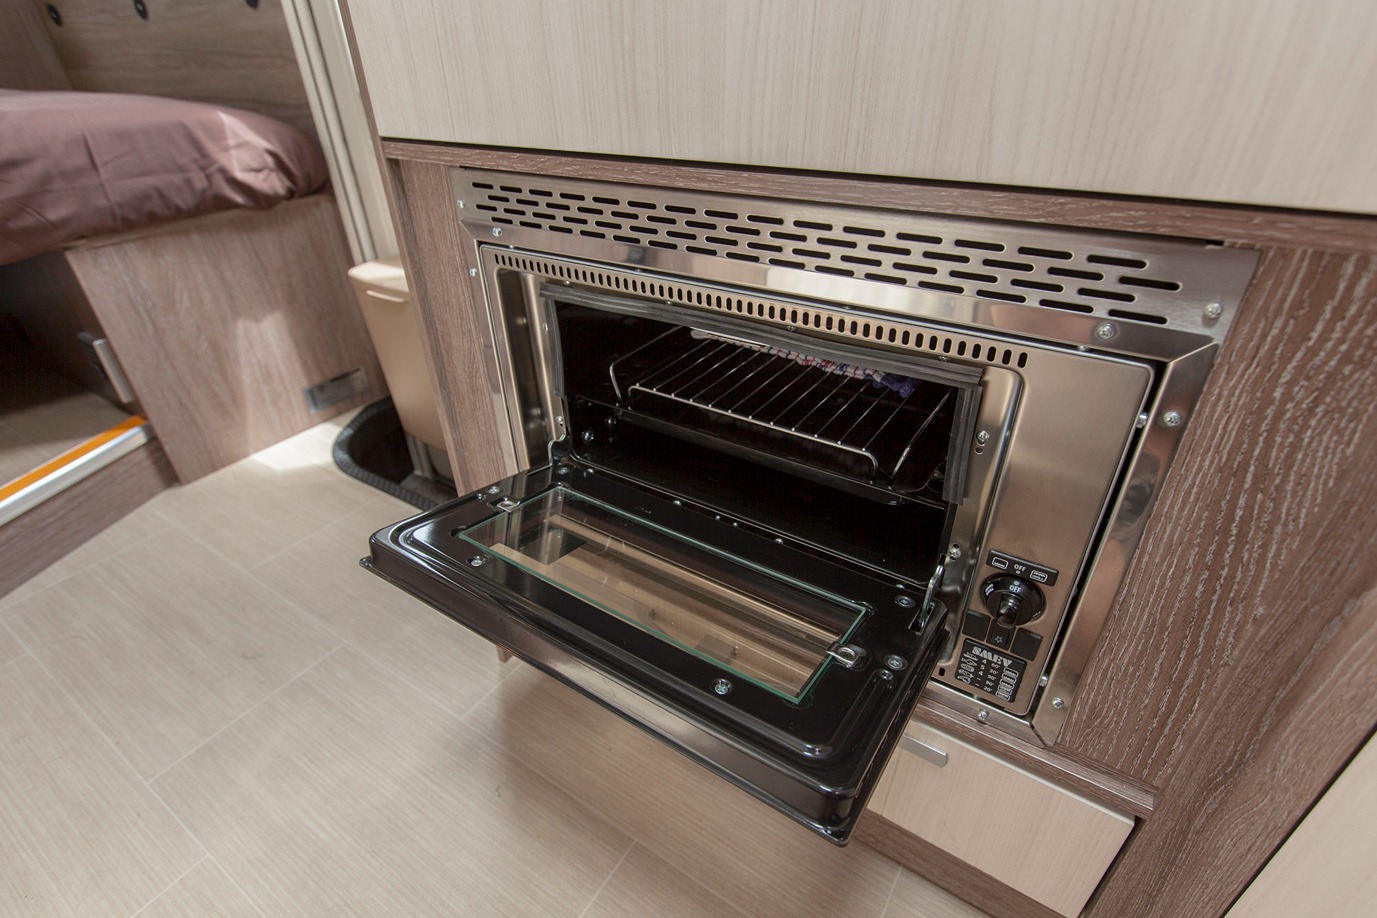 Oven in a motorhome